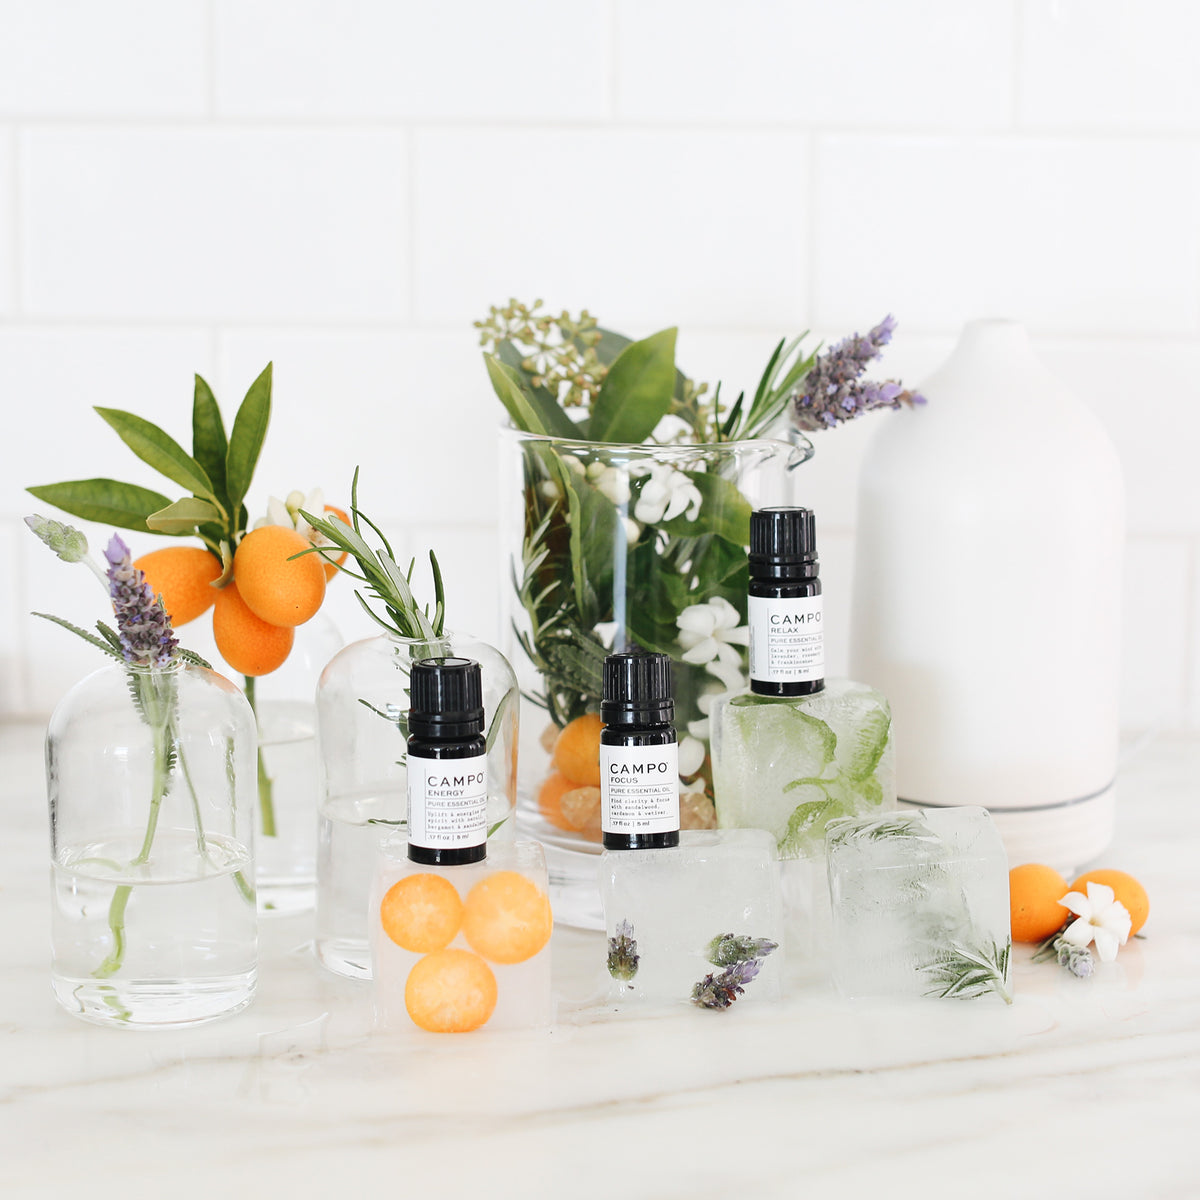 Campo Beauty RELAX Blend 5 ml and 15 ml Essential Oil. Dispels feelings of stress to promote deep relaxation. A calming blend of herbaceous floral notes of French Lavender, Rosemary, Frankincense, Italian Neroli Orange Blossom, Sweet Orange, and Bitter Orange.